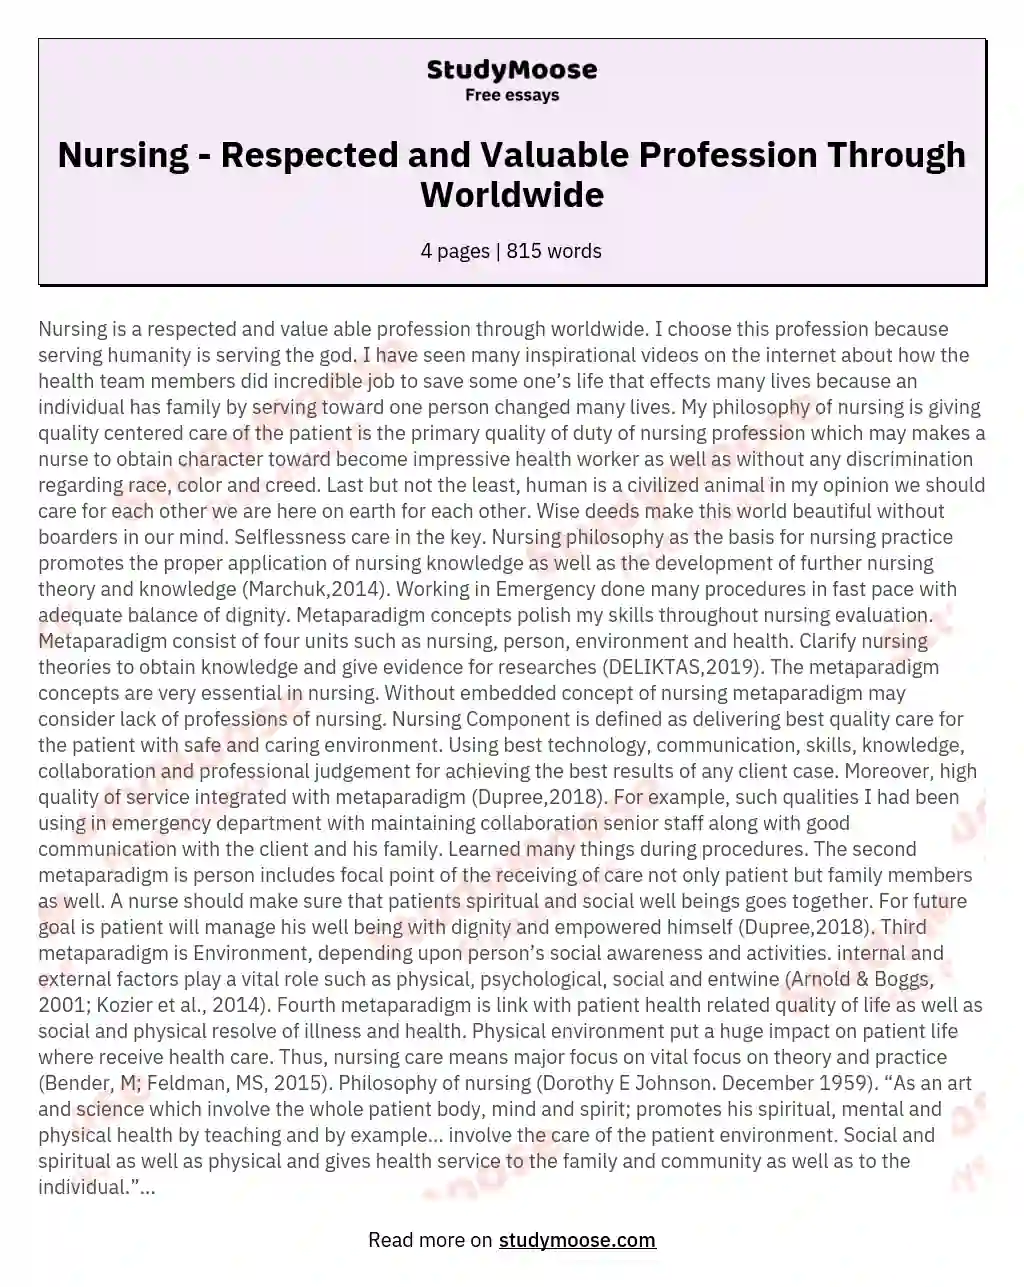 Nursing - Respected and Valuable Profession Through Worldwide essay